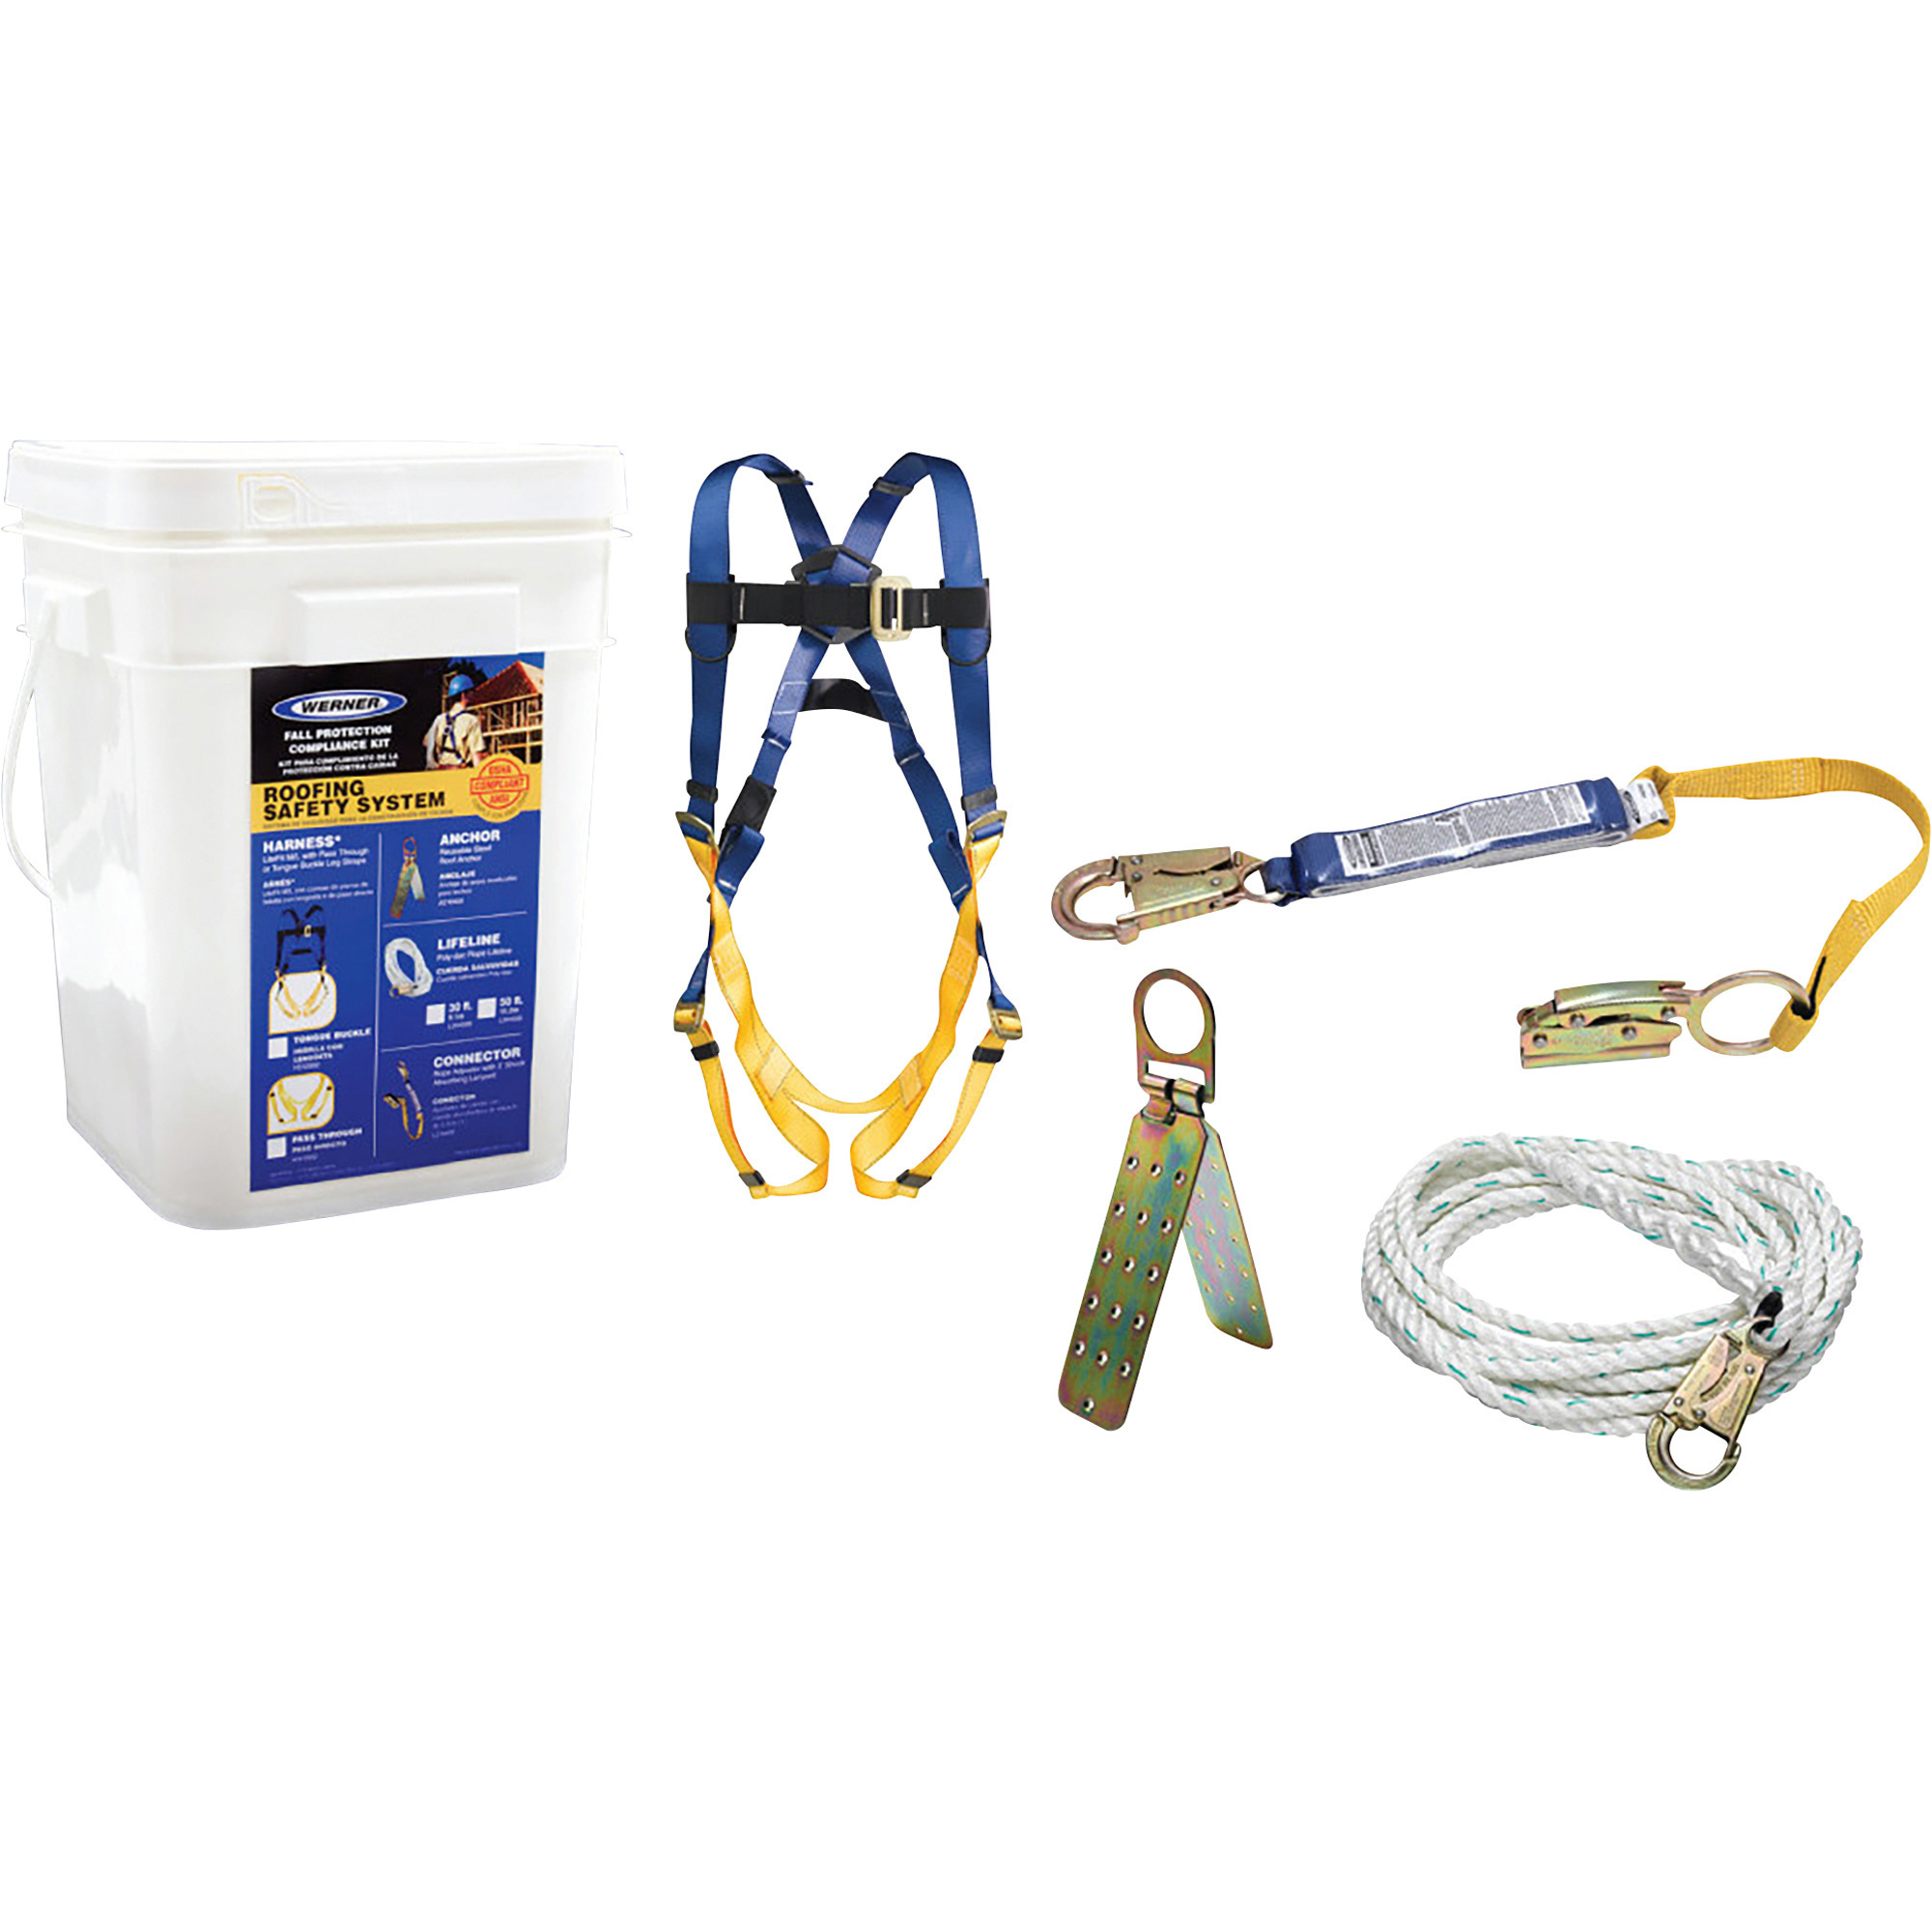 Fall Protection Roofing Safety System Compliance Kit Harness Roof